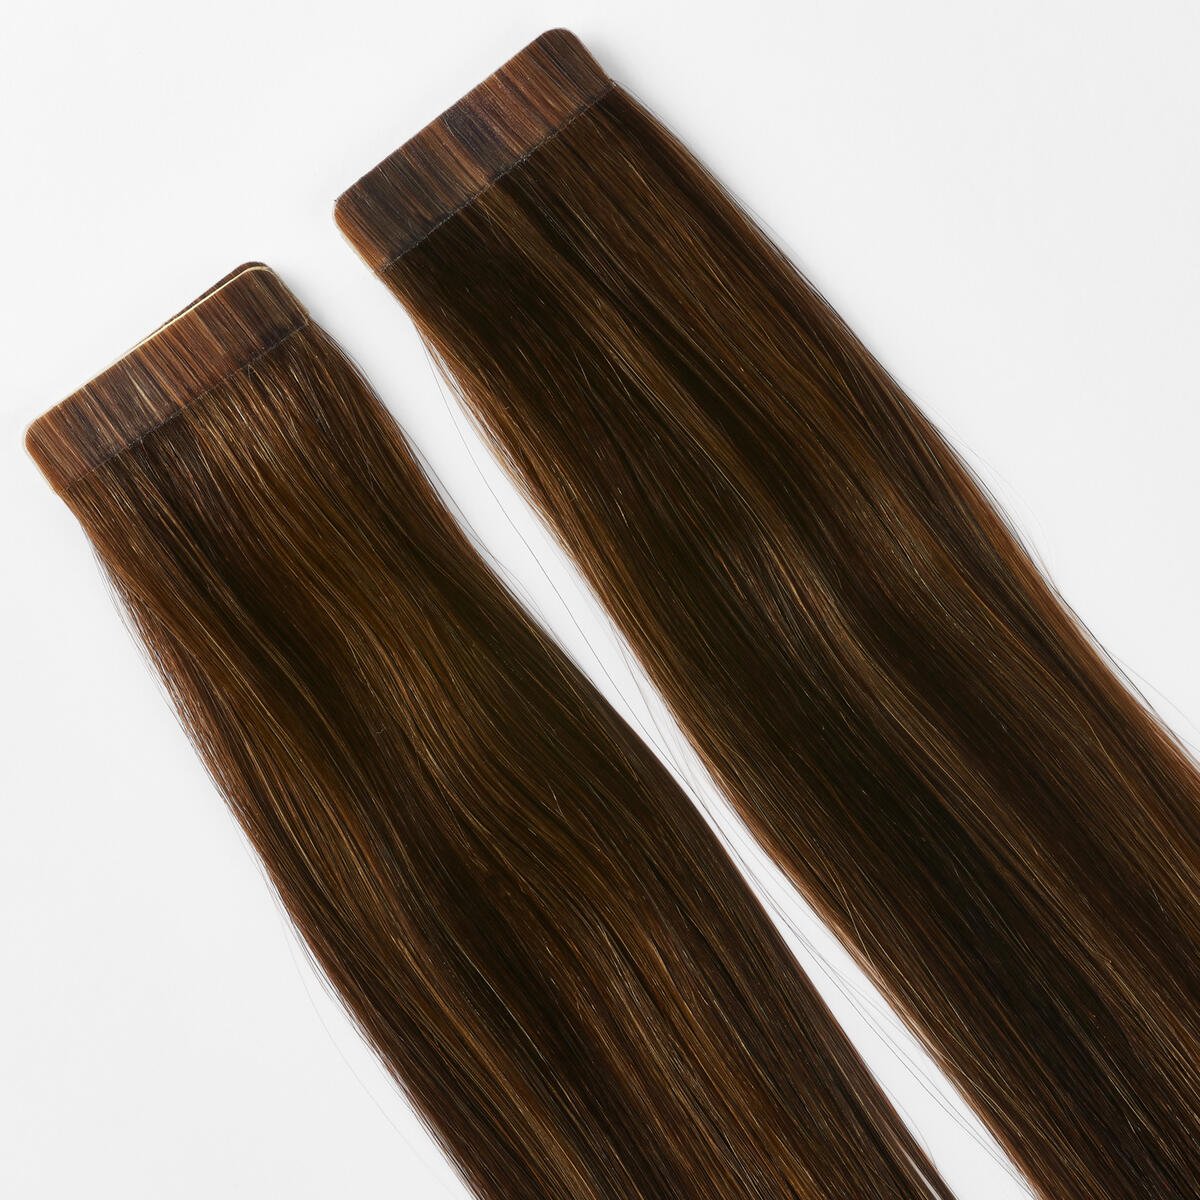 Basic Tape Extensions Classic 4 M2.3/5.0 Chocolate Mix 50 cm